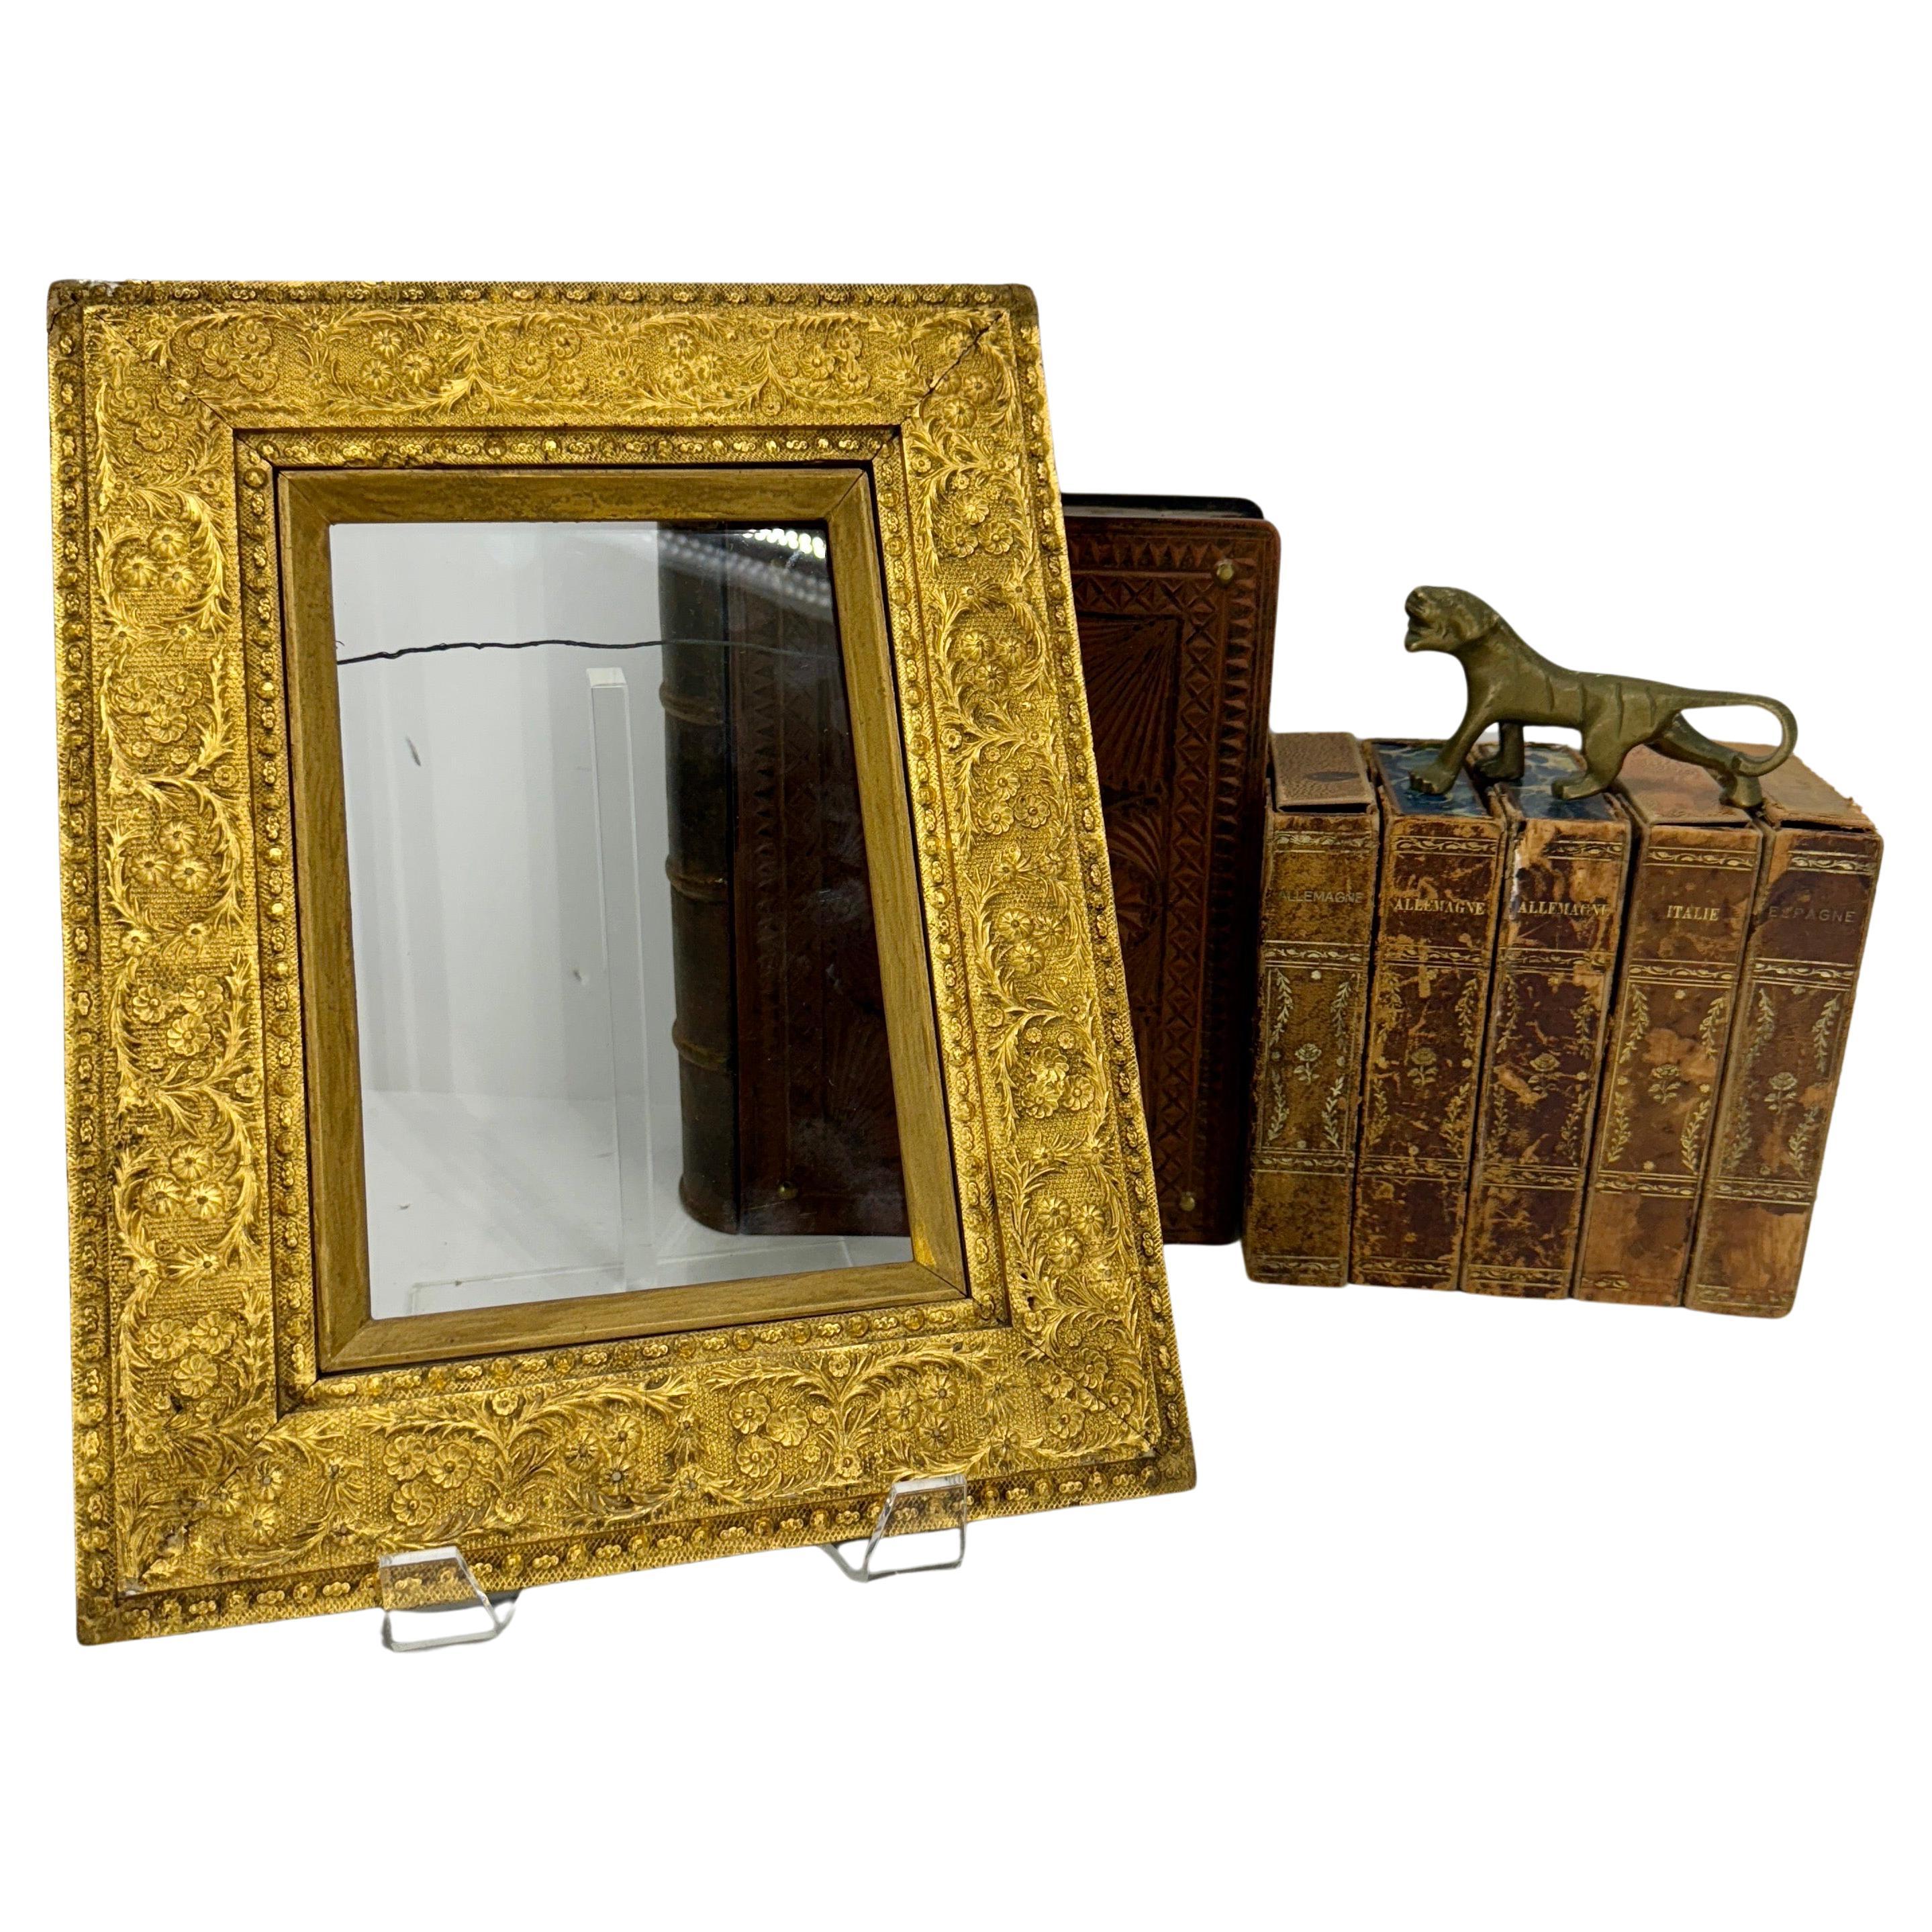 Hand-Crafted Small Italian Antique 19th Century Rectangular Gilded Frame